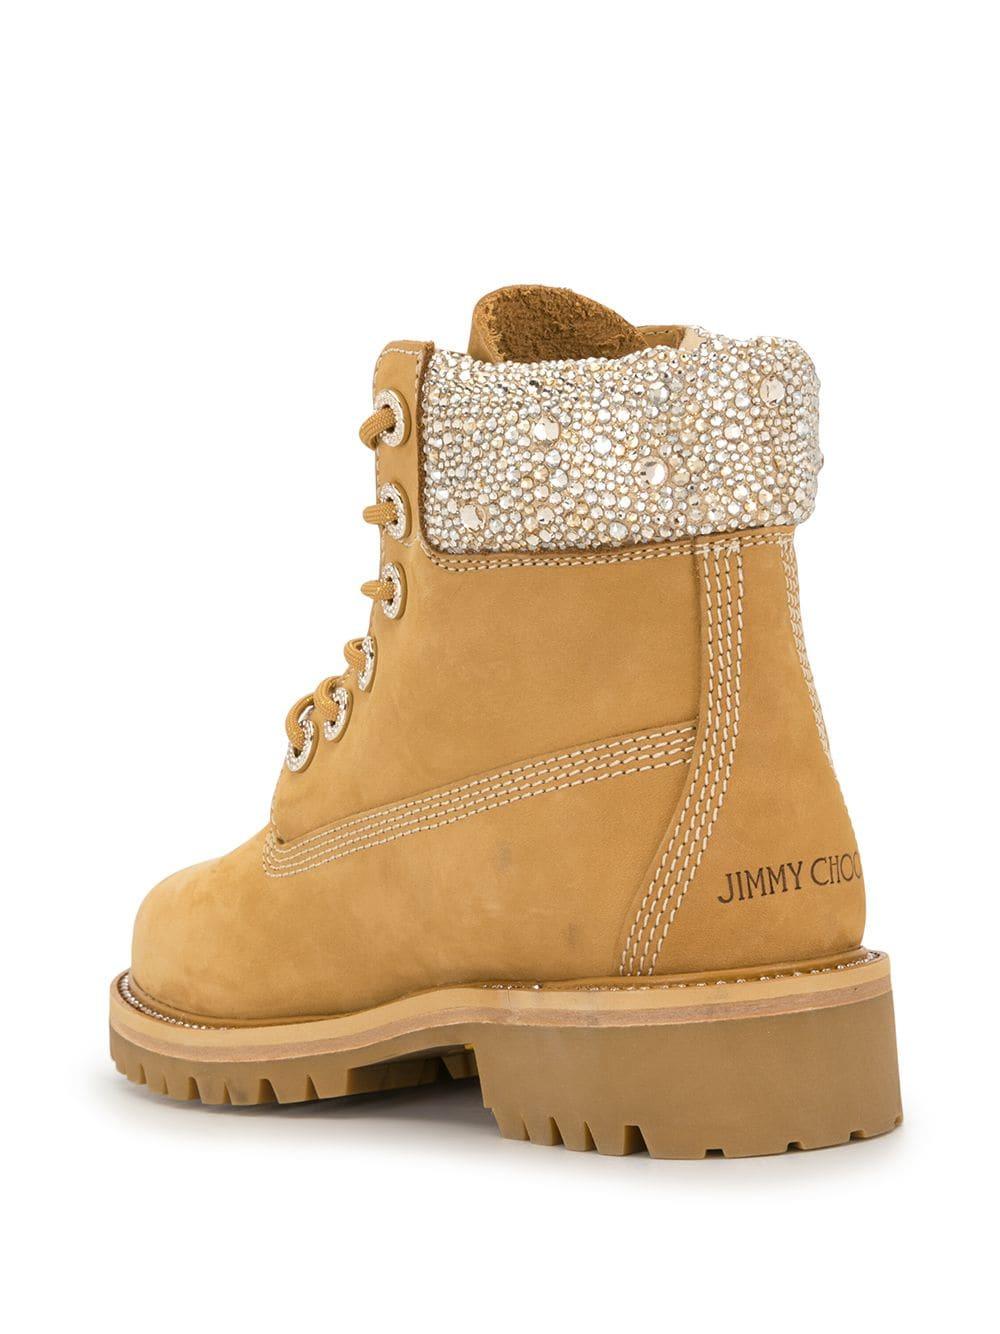 Timberland Femme Strass Poland, SAVE 44% - thlaw.co.nz